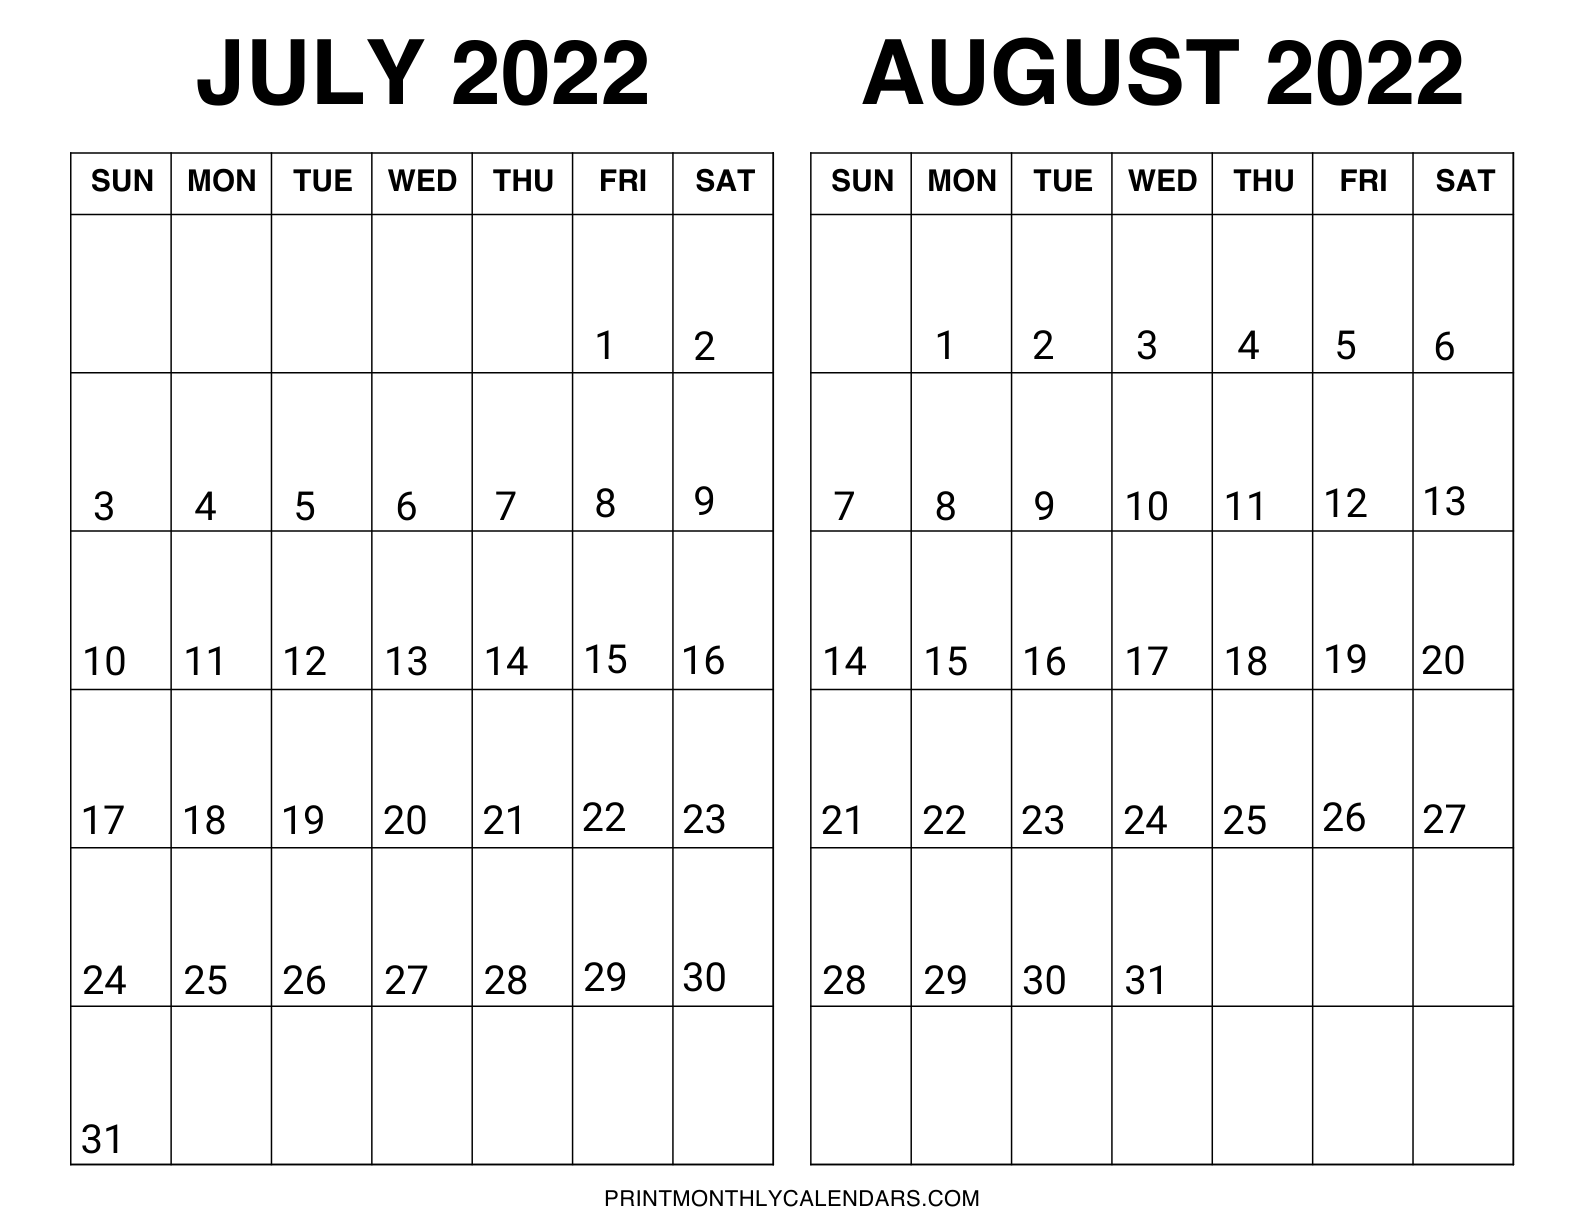 July August 2022 calendar template with weekdays starting from Sunday. Template is designed in landscape layout on one page with bold monthly dates in the grid.